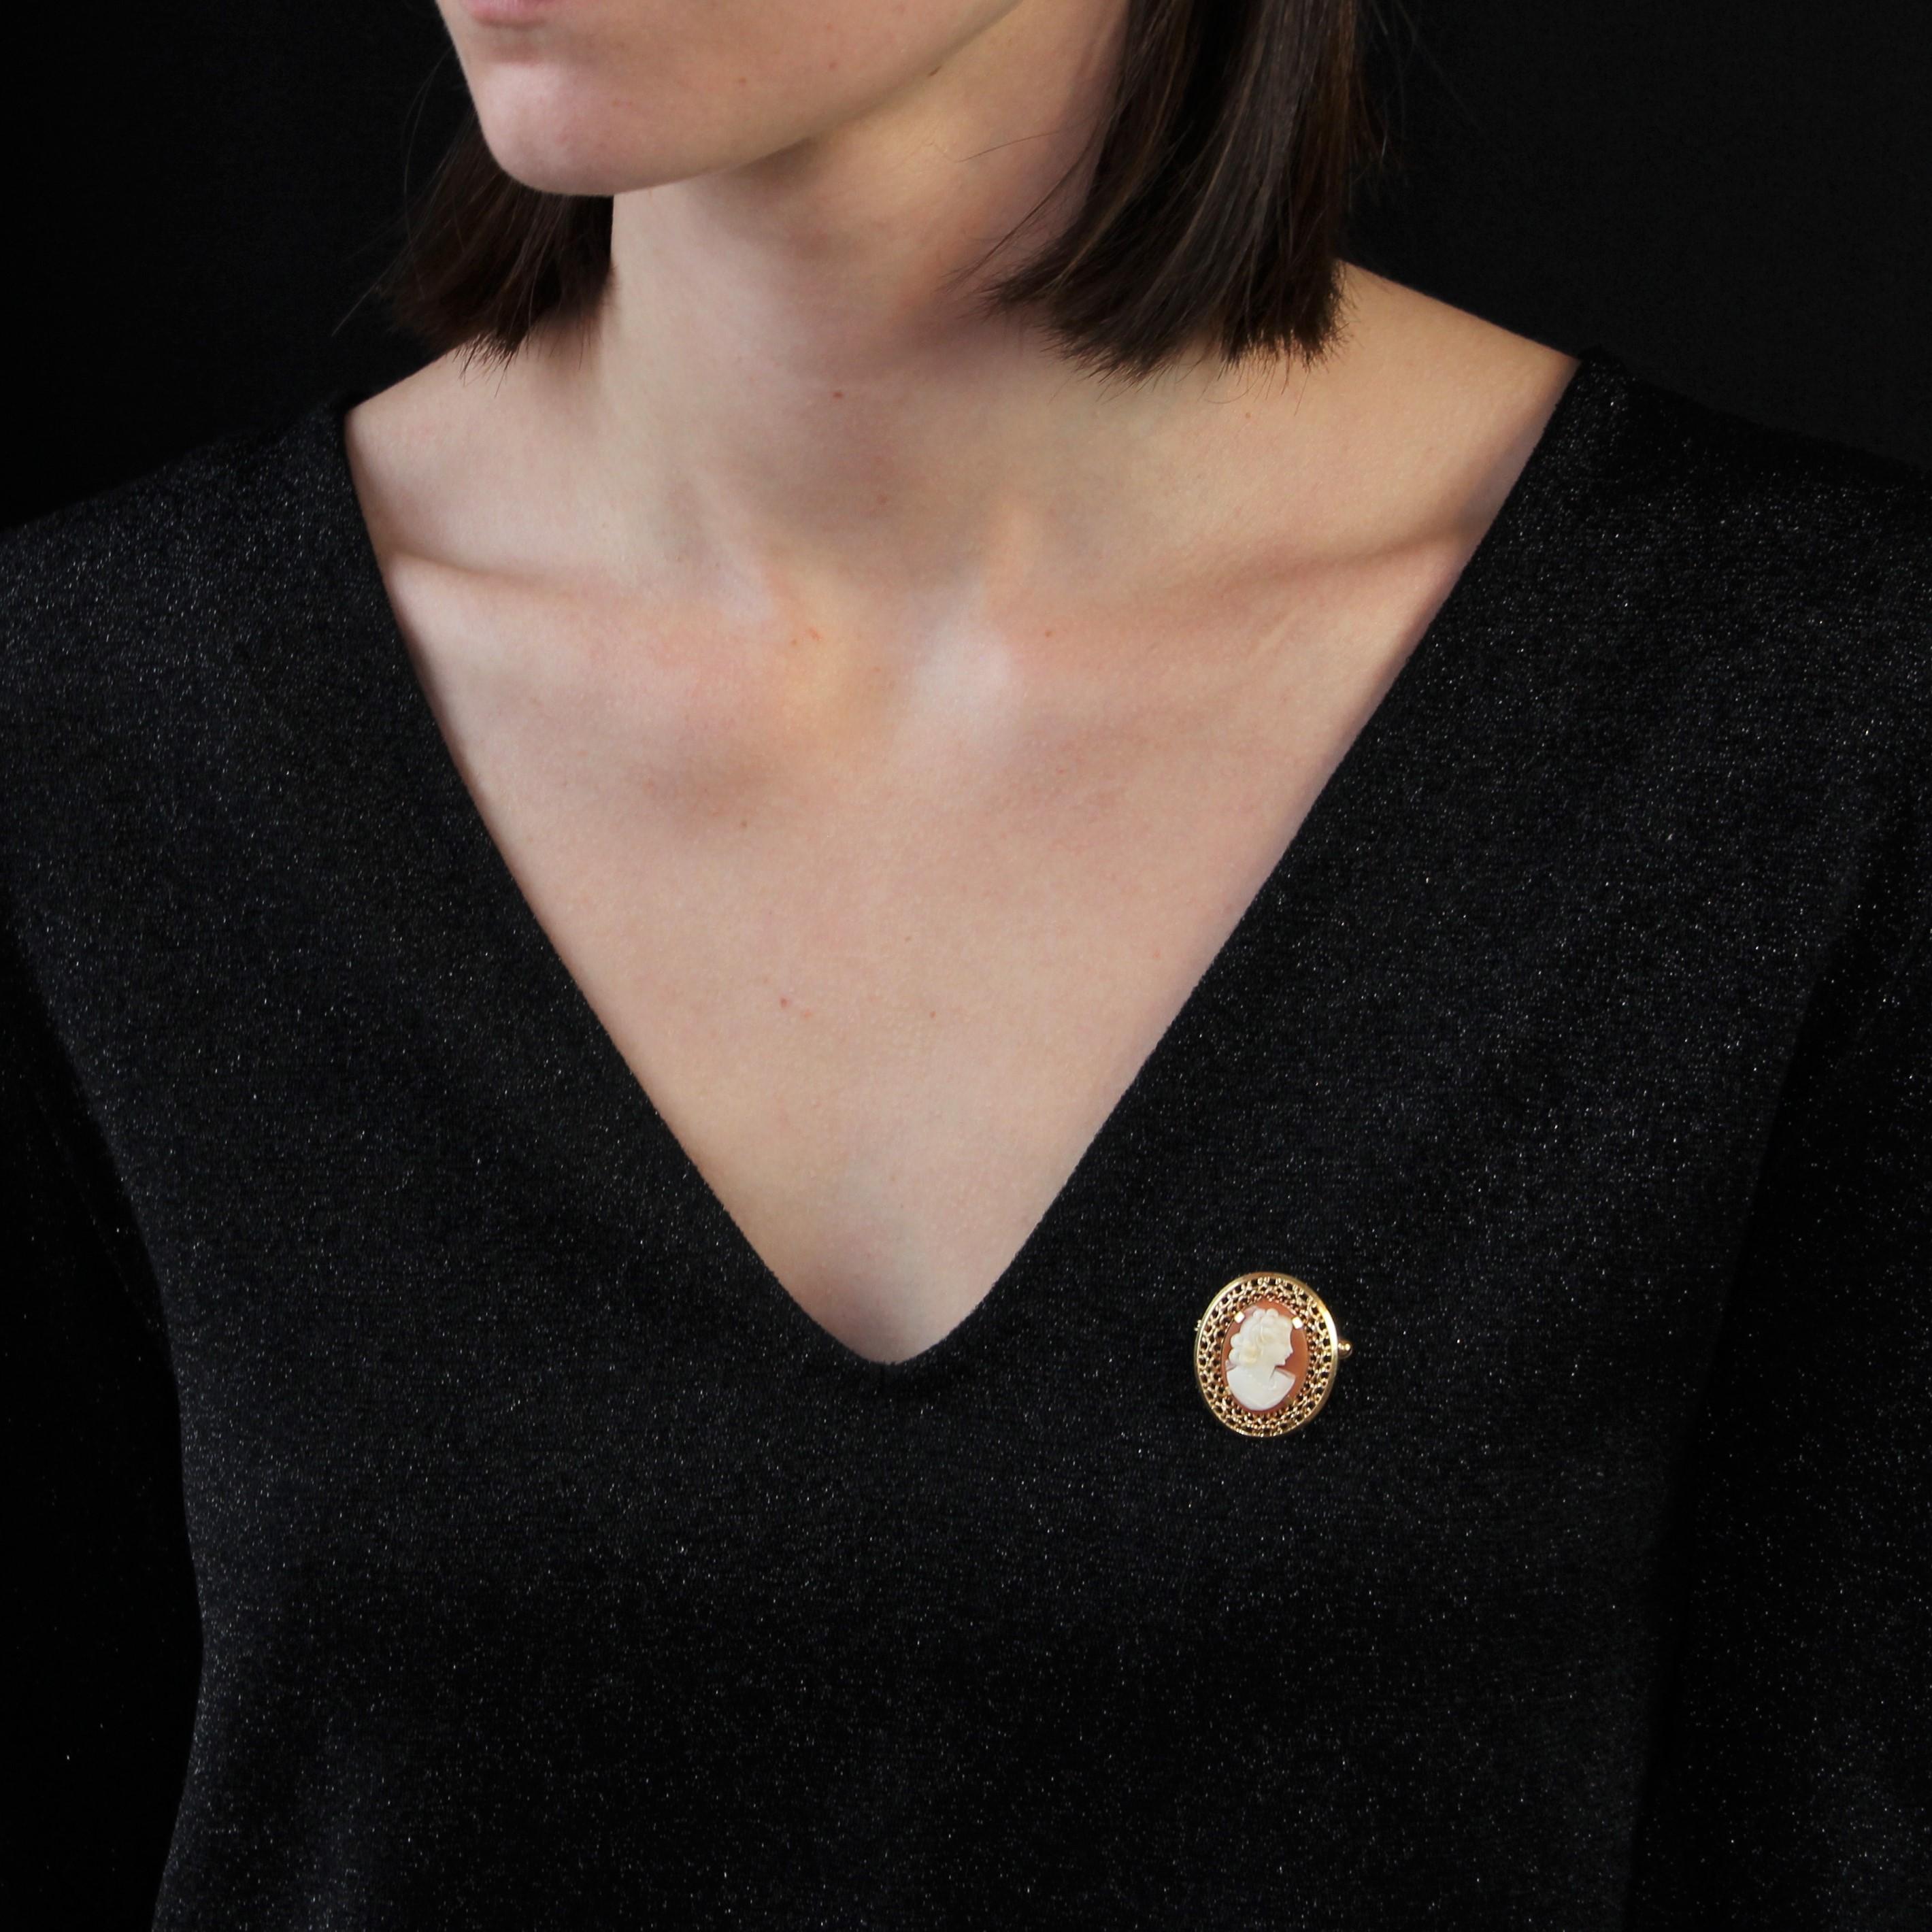 Brooch - pendant in 18 karat yellow gold, eagle head hallmark.
Of oval shape, this cameo on shell brooch represents a woman elegantly dressed. The surrounding of this brooch is decorated with gold polylobes and openwork. On the back is a clasp